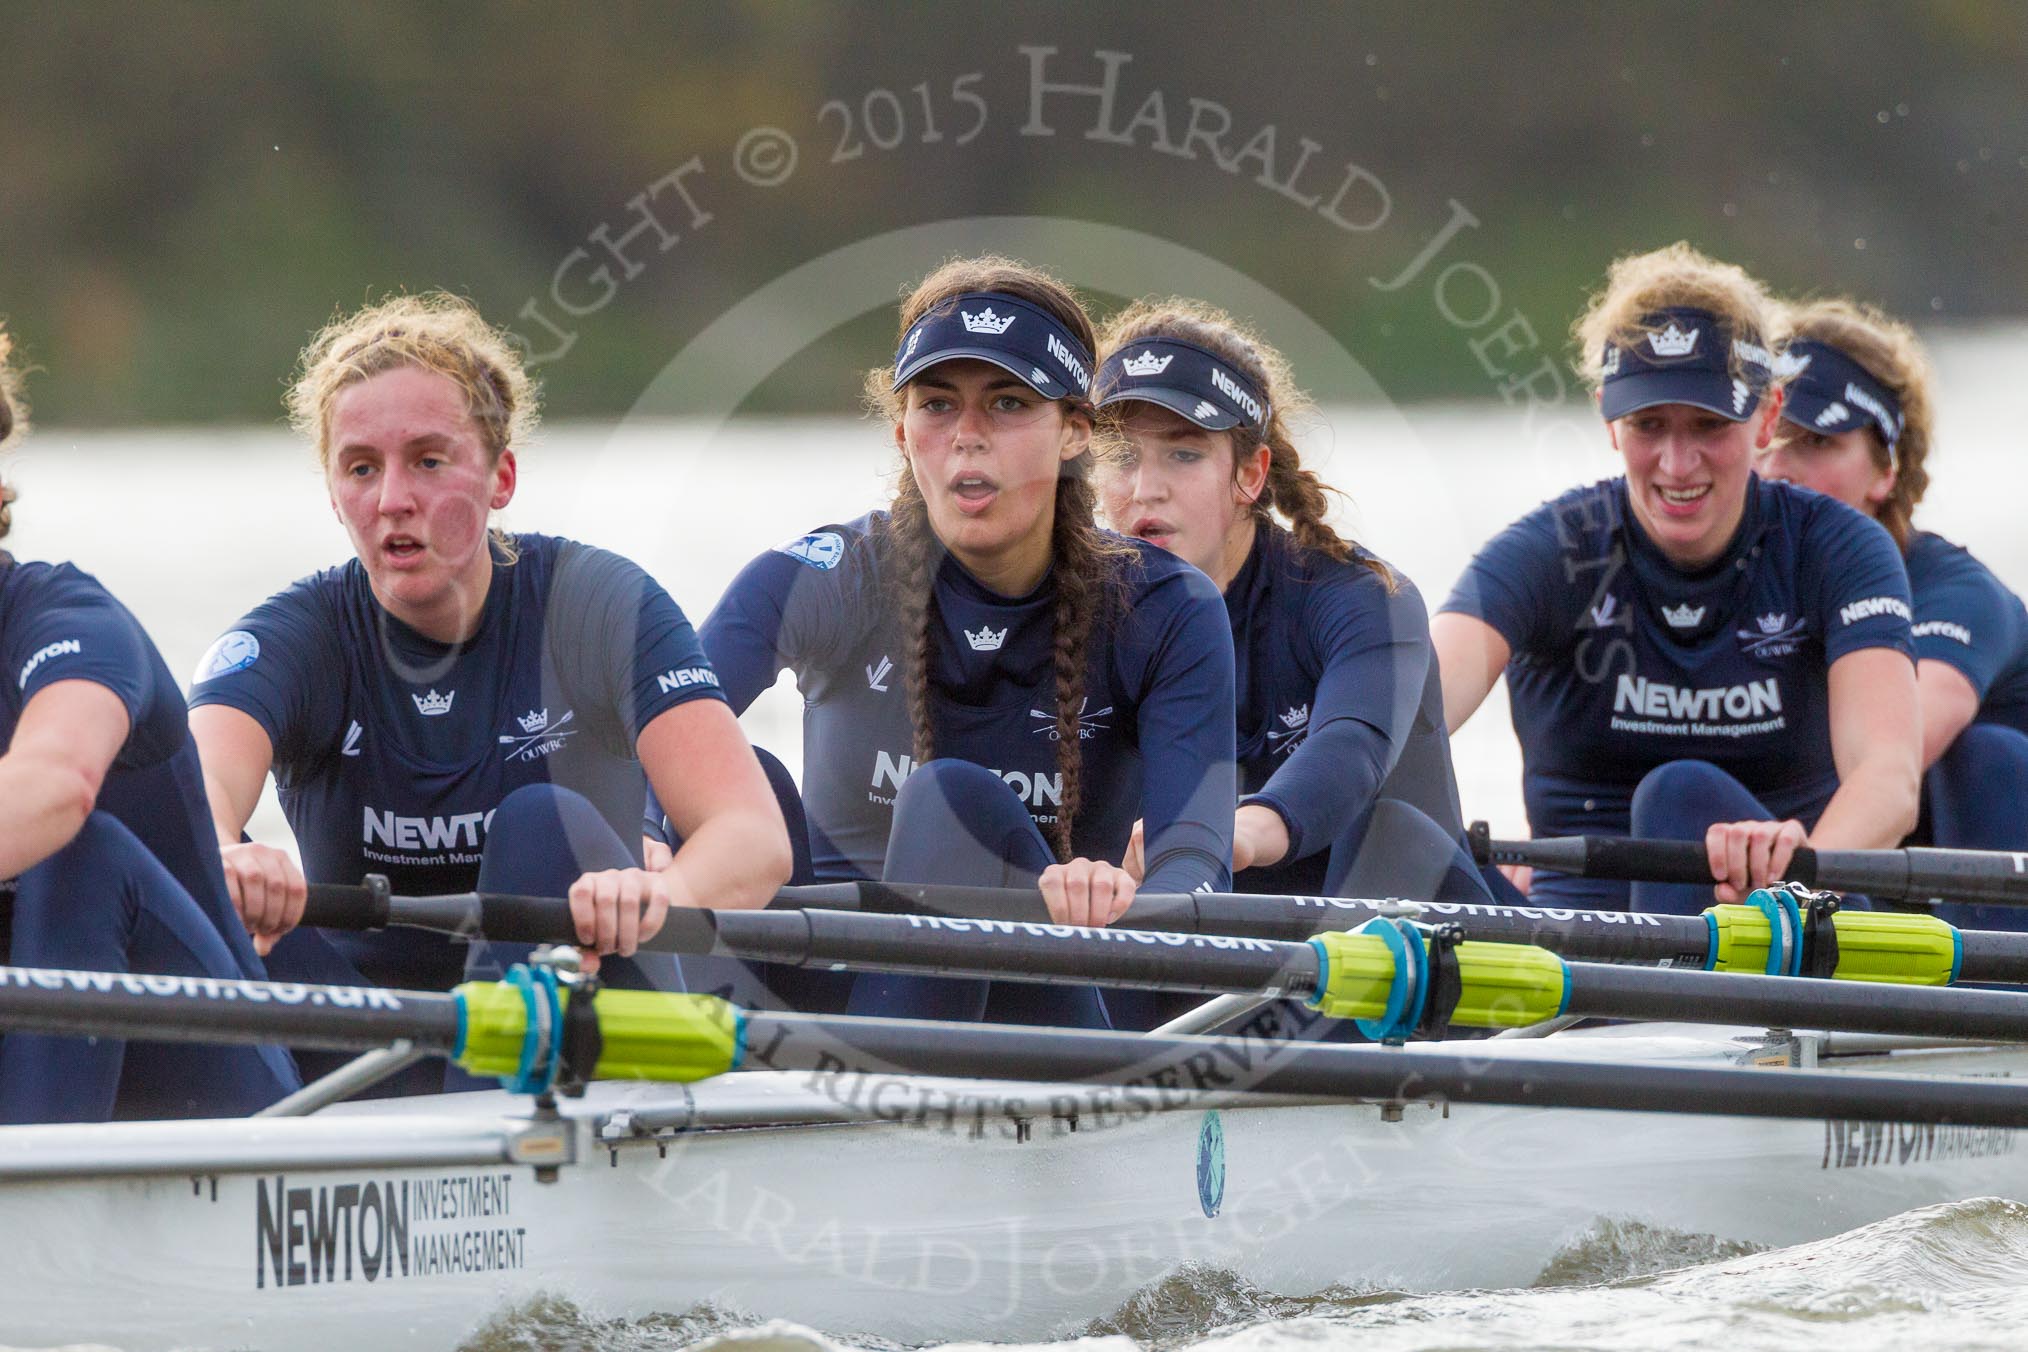 The Boat Race season 2016 - Women's Boat Race Trial Eights (OUWBC, Oxford): "Scylla", here 5-Anastasia Chitty, 4-Rebecca Te Water Naude, 3-Elettra Ardissino, 2-Merel Lefferts, bow-Issy Dodds.
River Thames between Putney Bridge and Mortlake,
London SW15,

United Kingdom,
on 10 December 2015 at 12:29, image #250